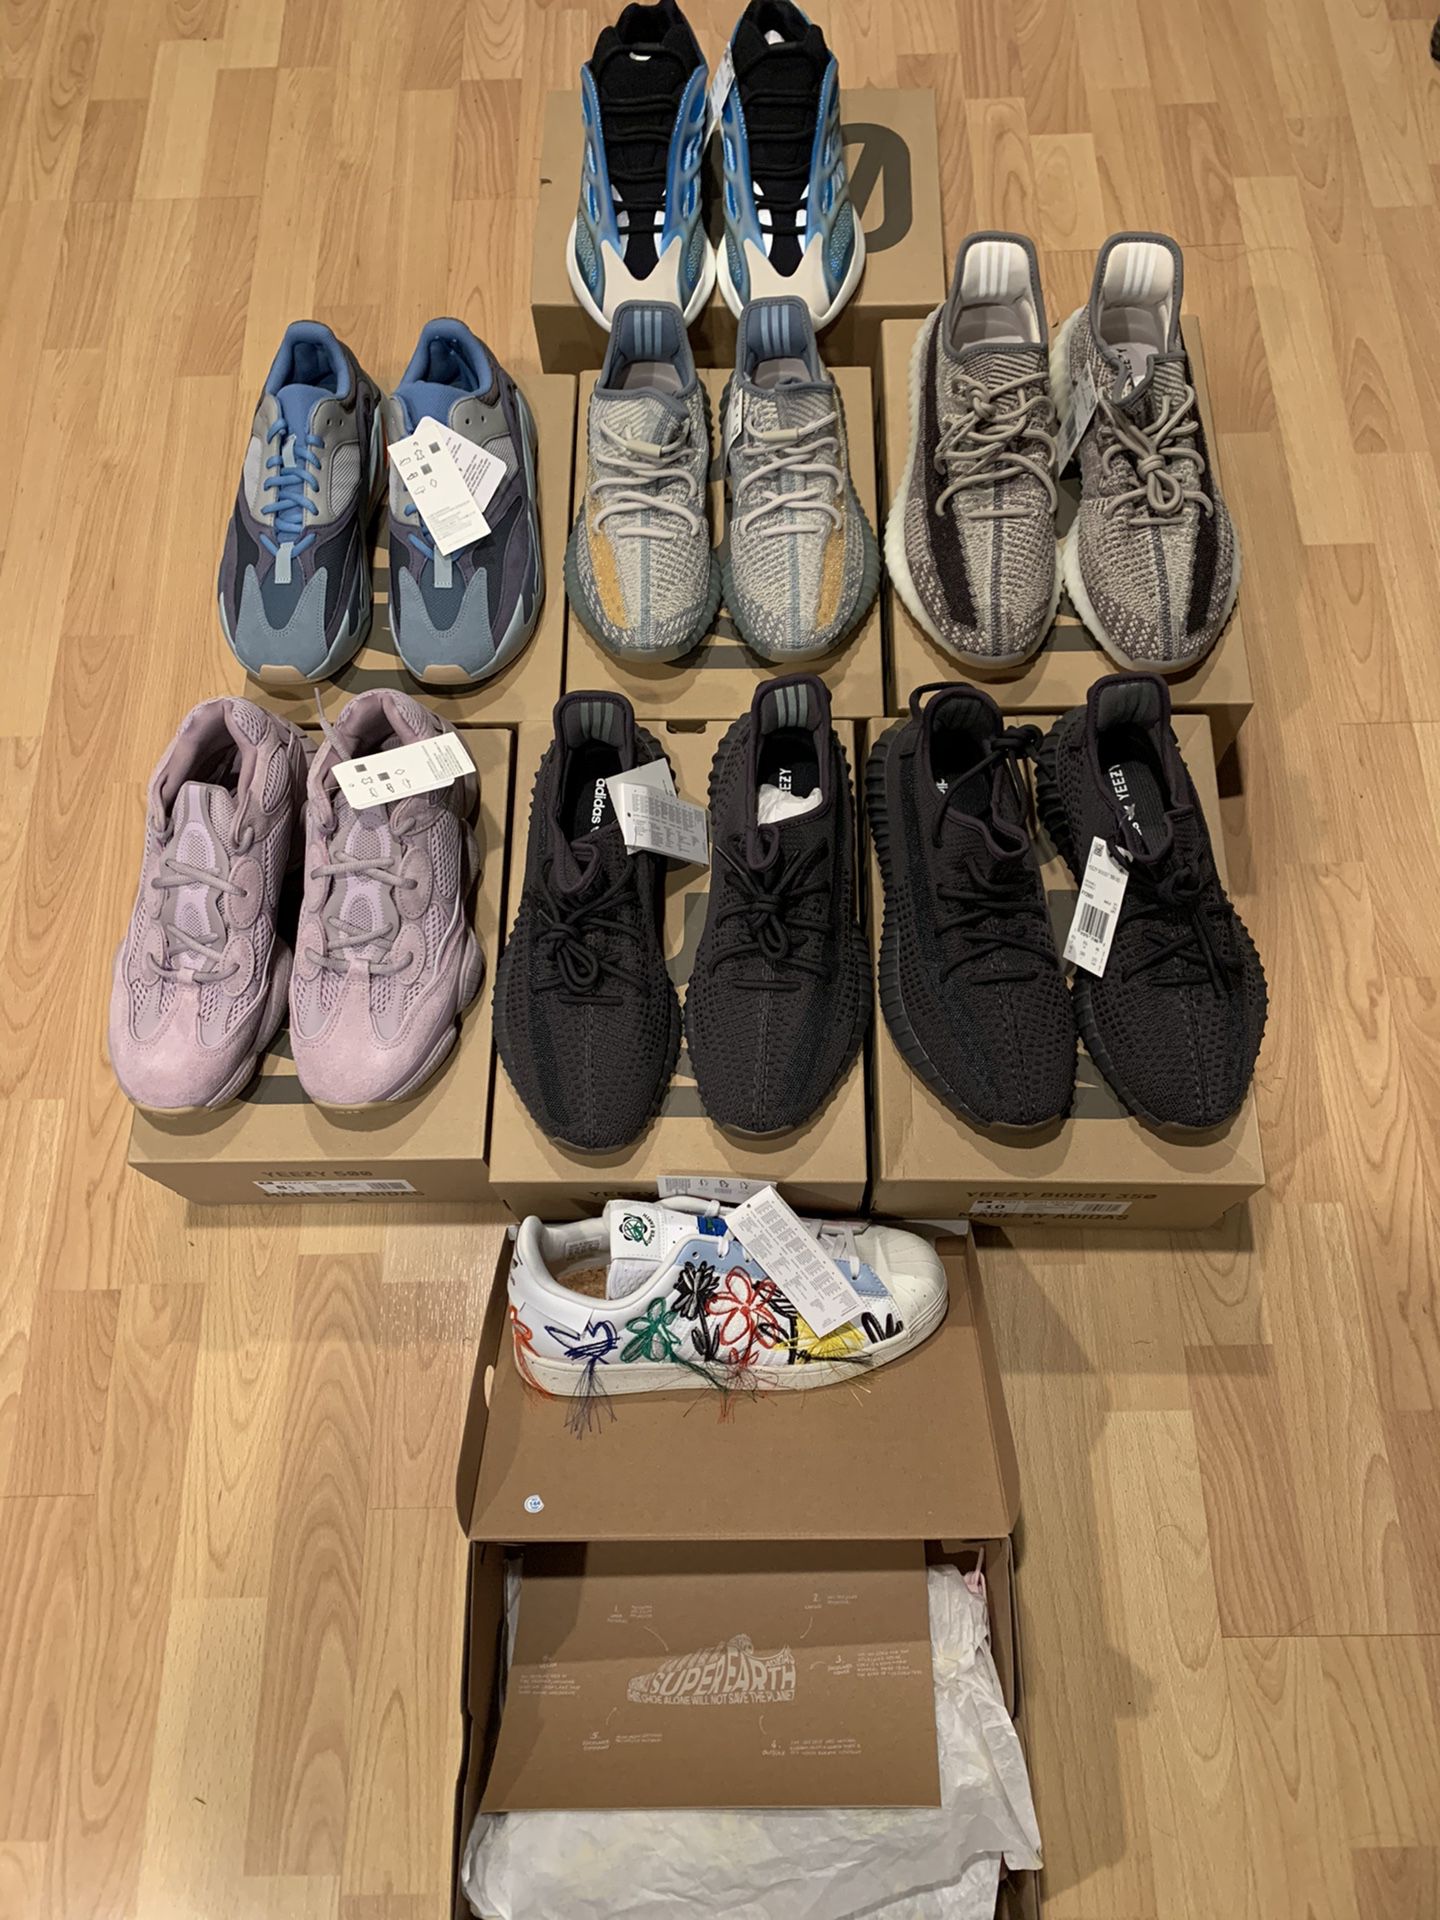 ALL BRAND YEEZY 350, 500, 700 SIZING IN LAST BULK BUYER PREFERRED for Sale in Los Angeles, CA - OfferUp